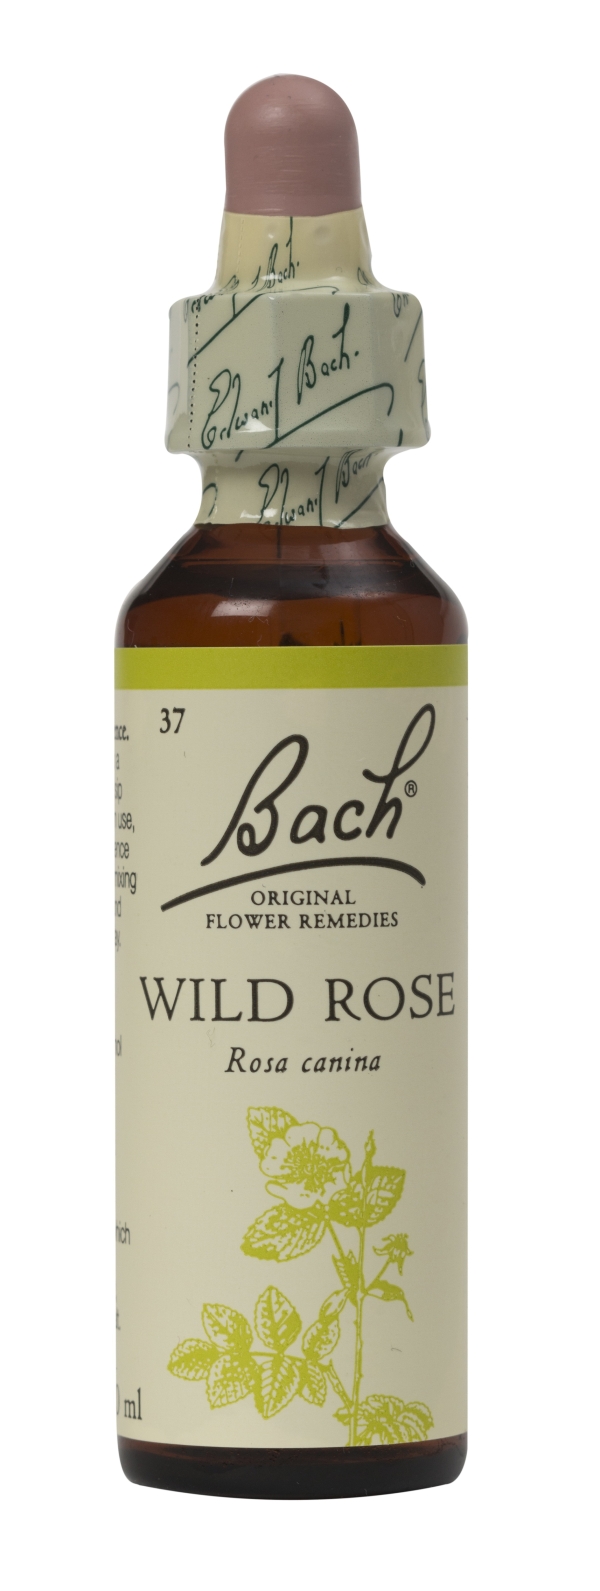 Nelson Bach Flower Remedies: Bach Wild Rose Flower Remedy (20ml) available online here